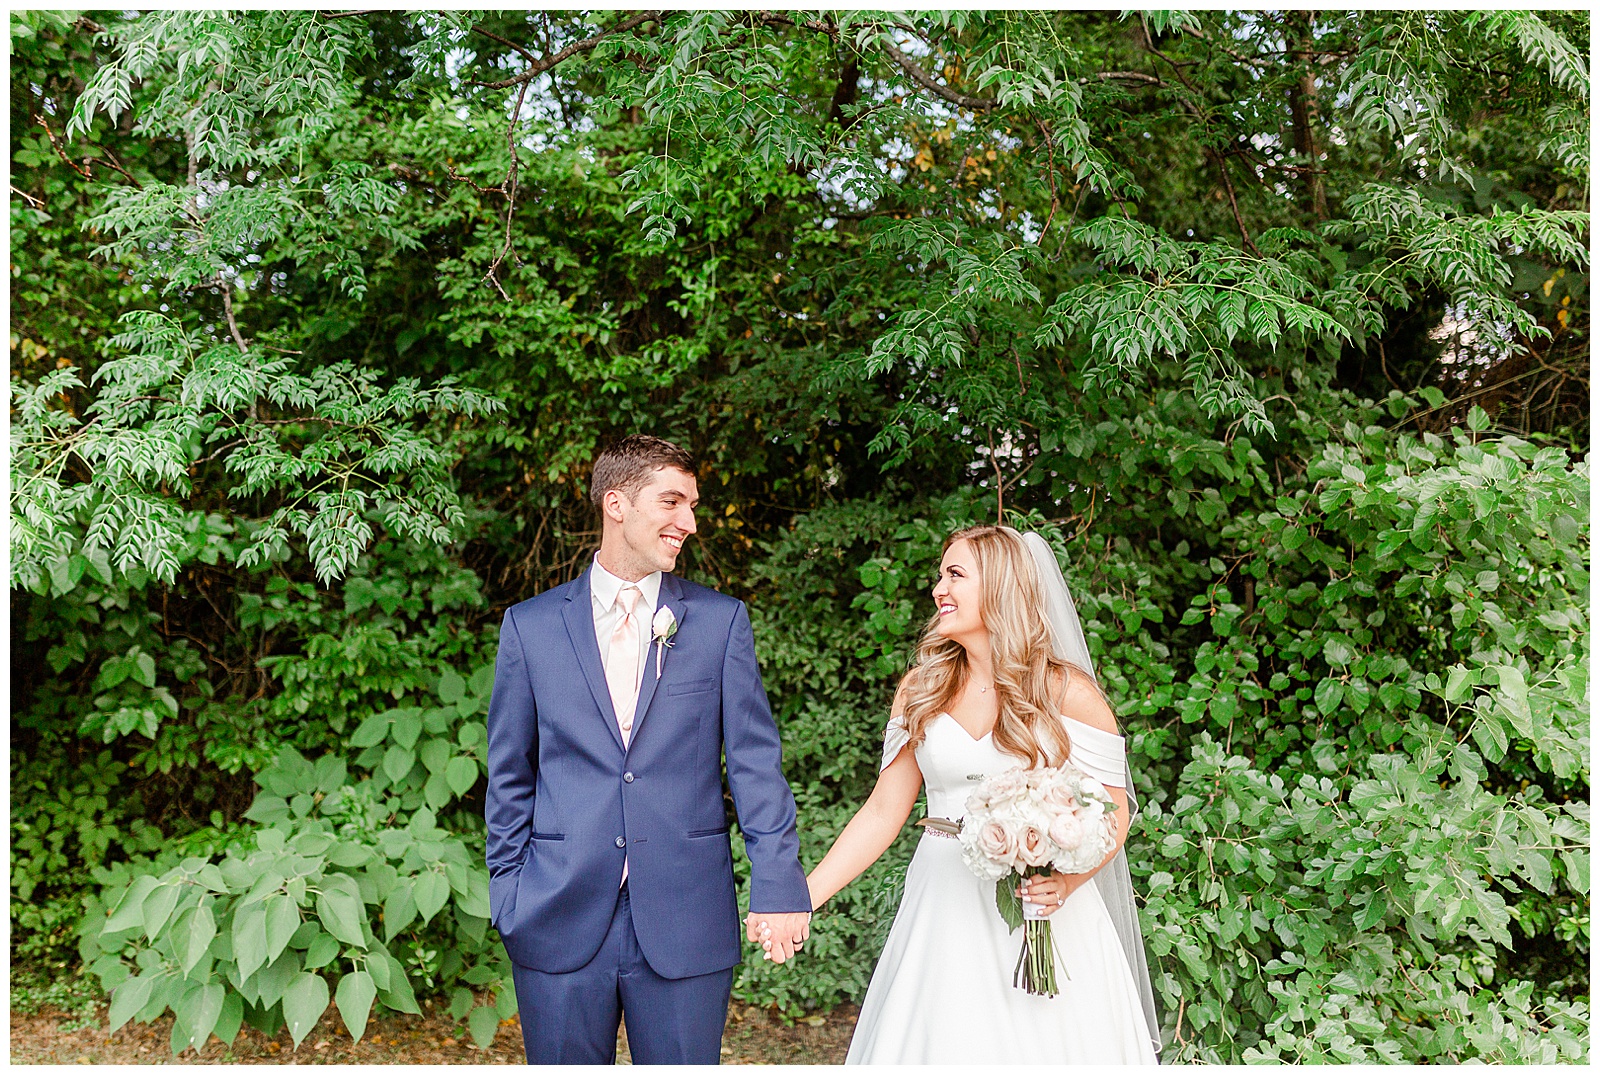 Bride and Groom Outdoor Portraits with blue suit and off shoulder wedding dress from Summer Wedding in Charlotte, NC | Check out the full wedding at KevynDixonPhoto.com